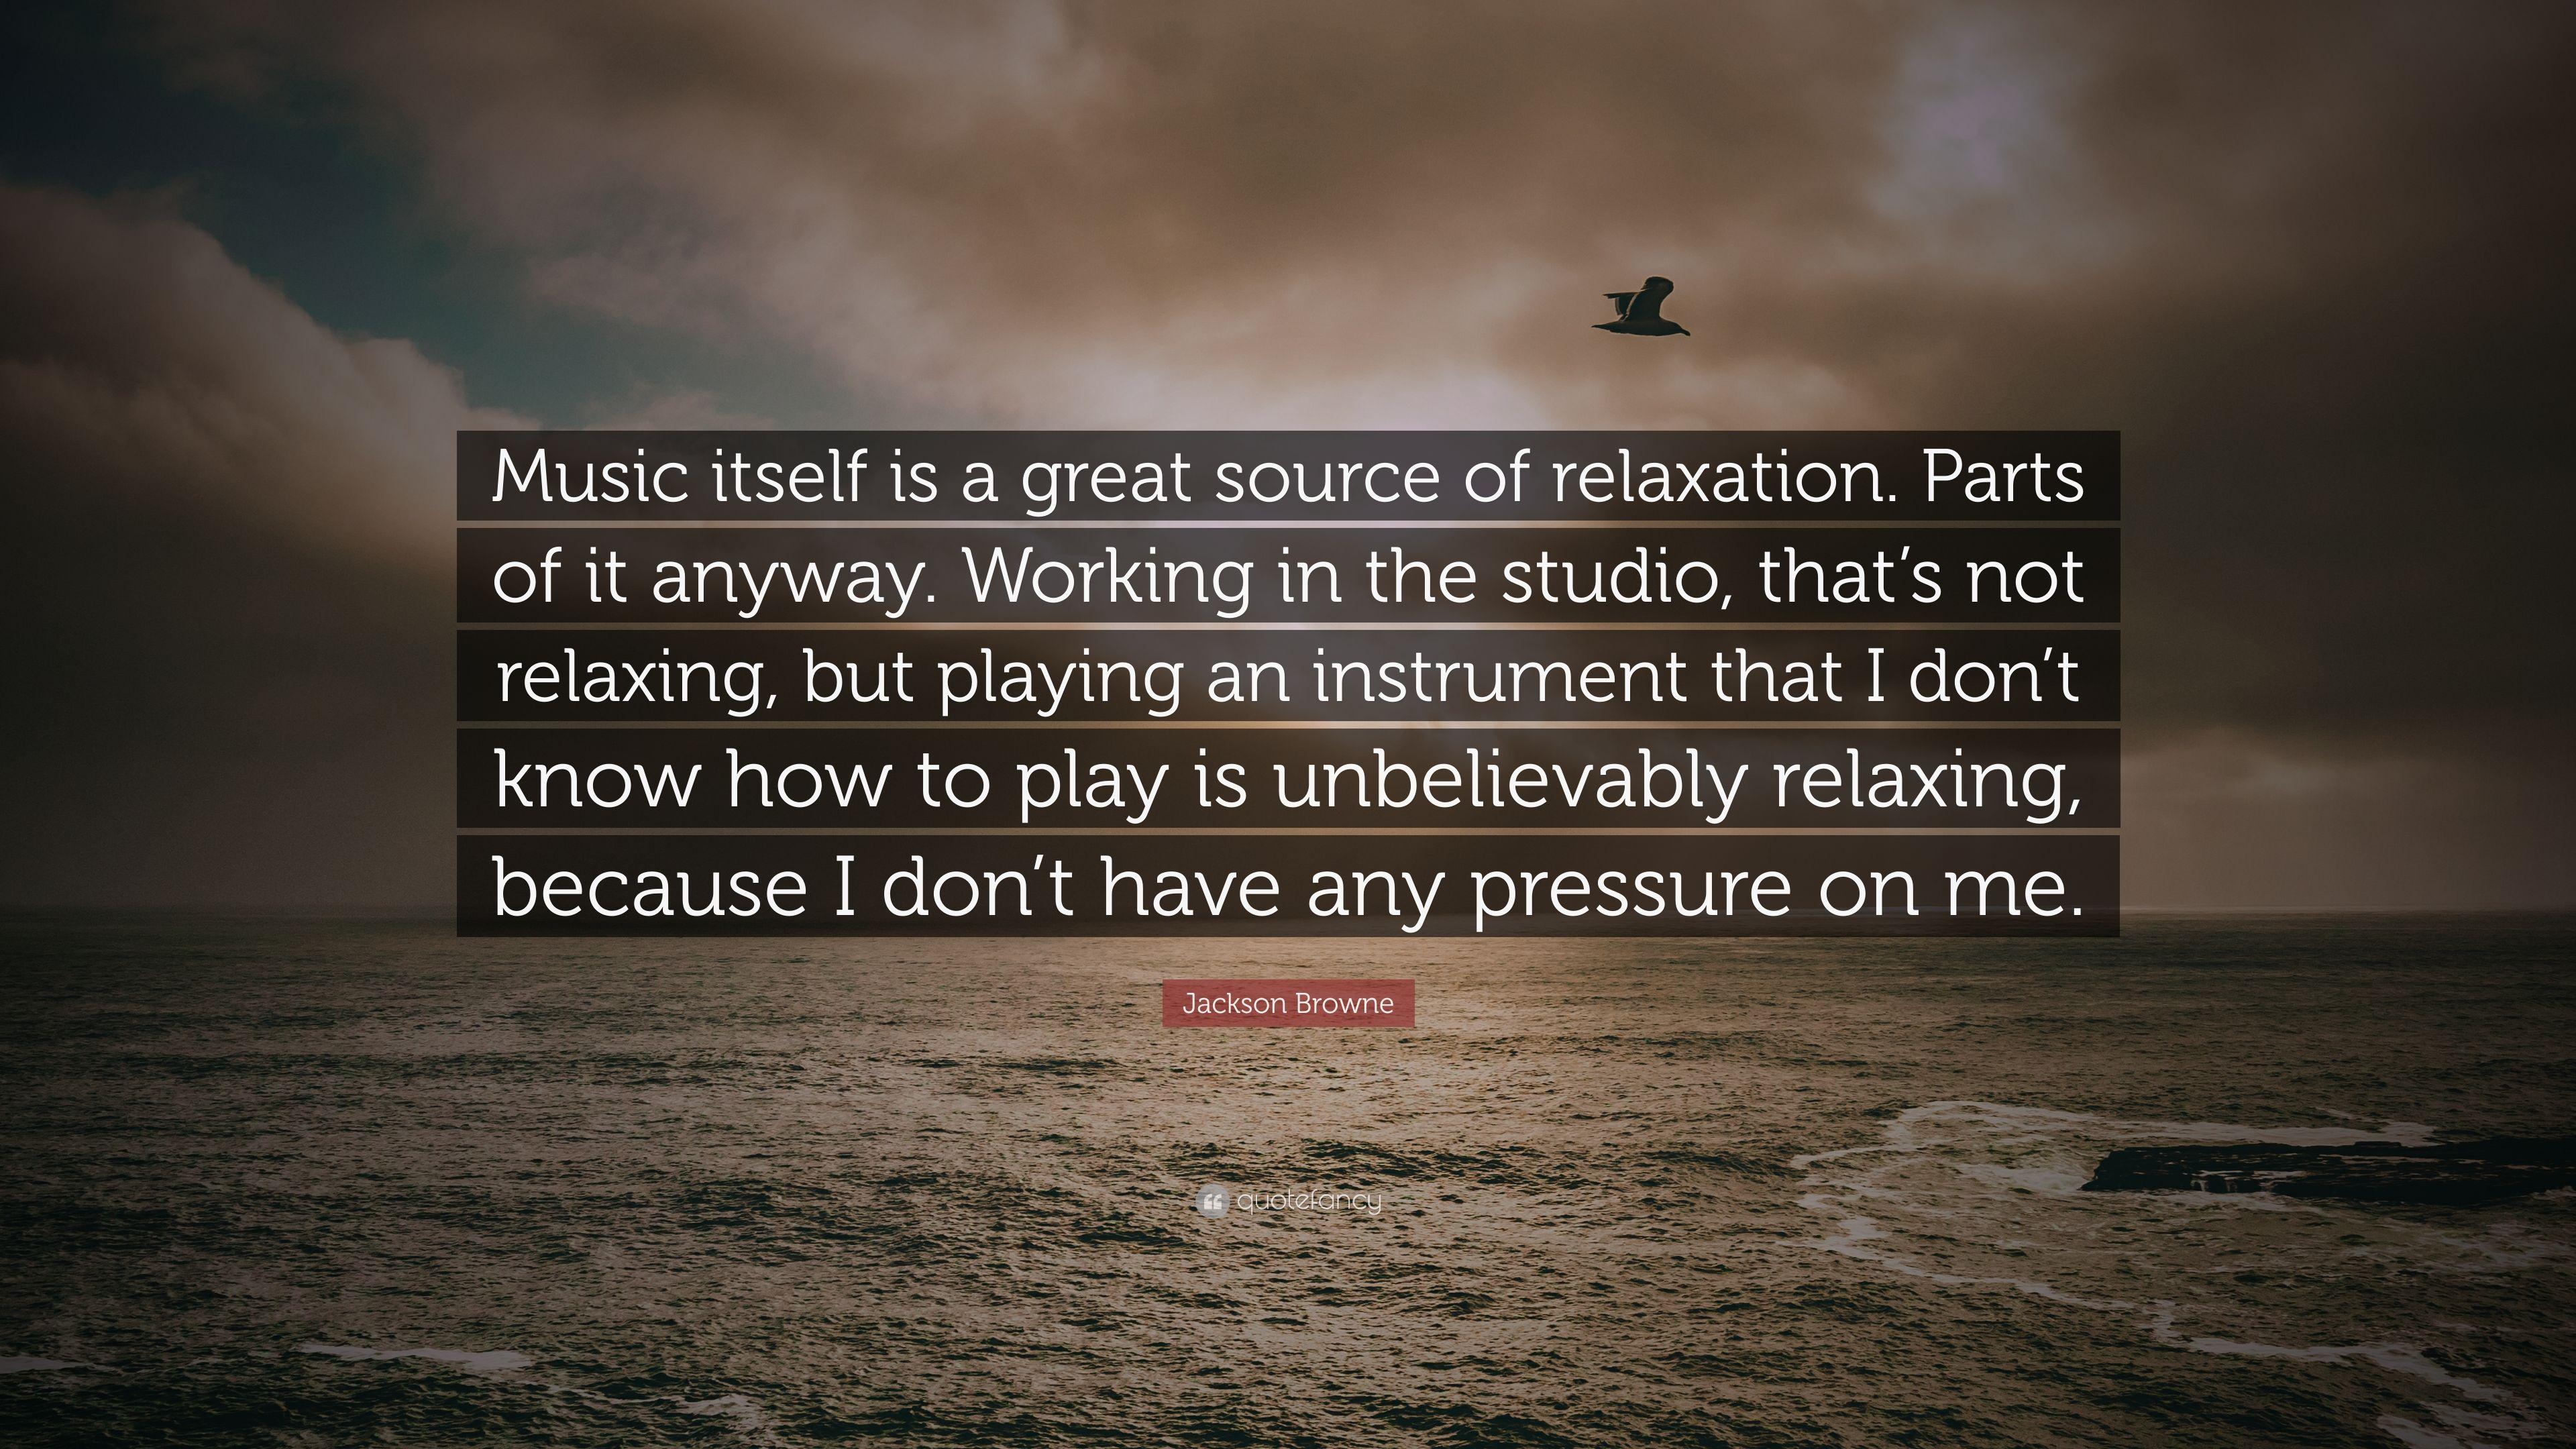 Jackson Browne Quote: “Music itself is a great source